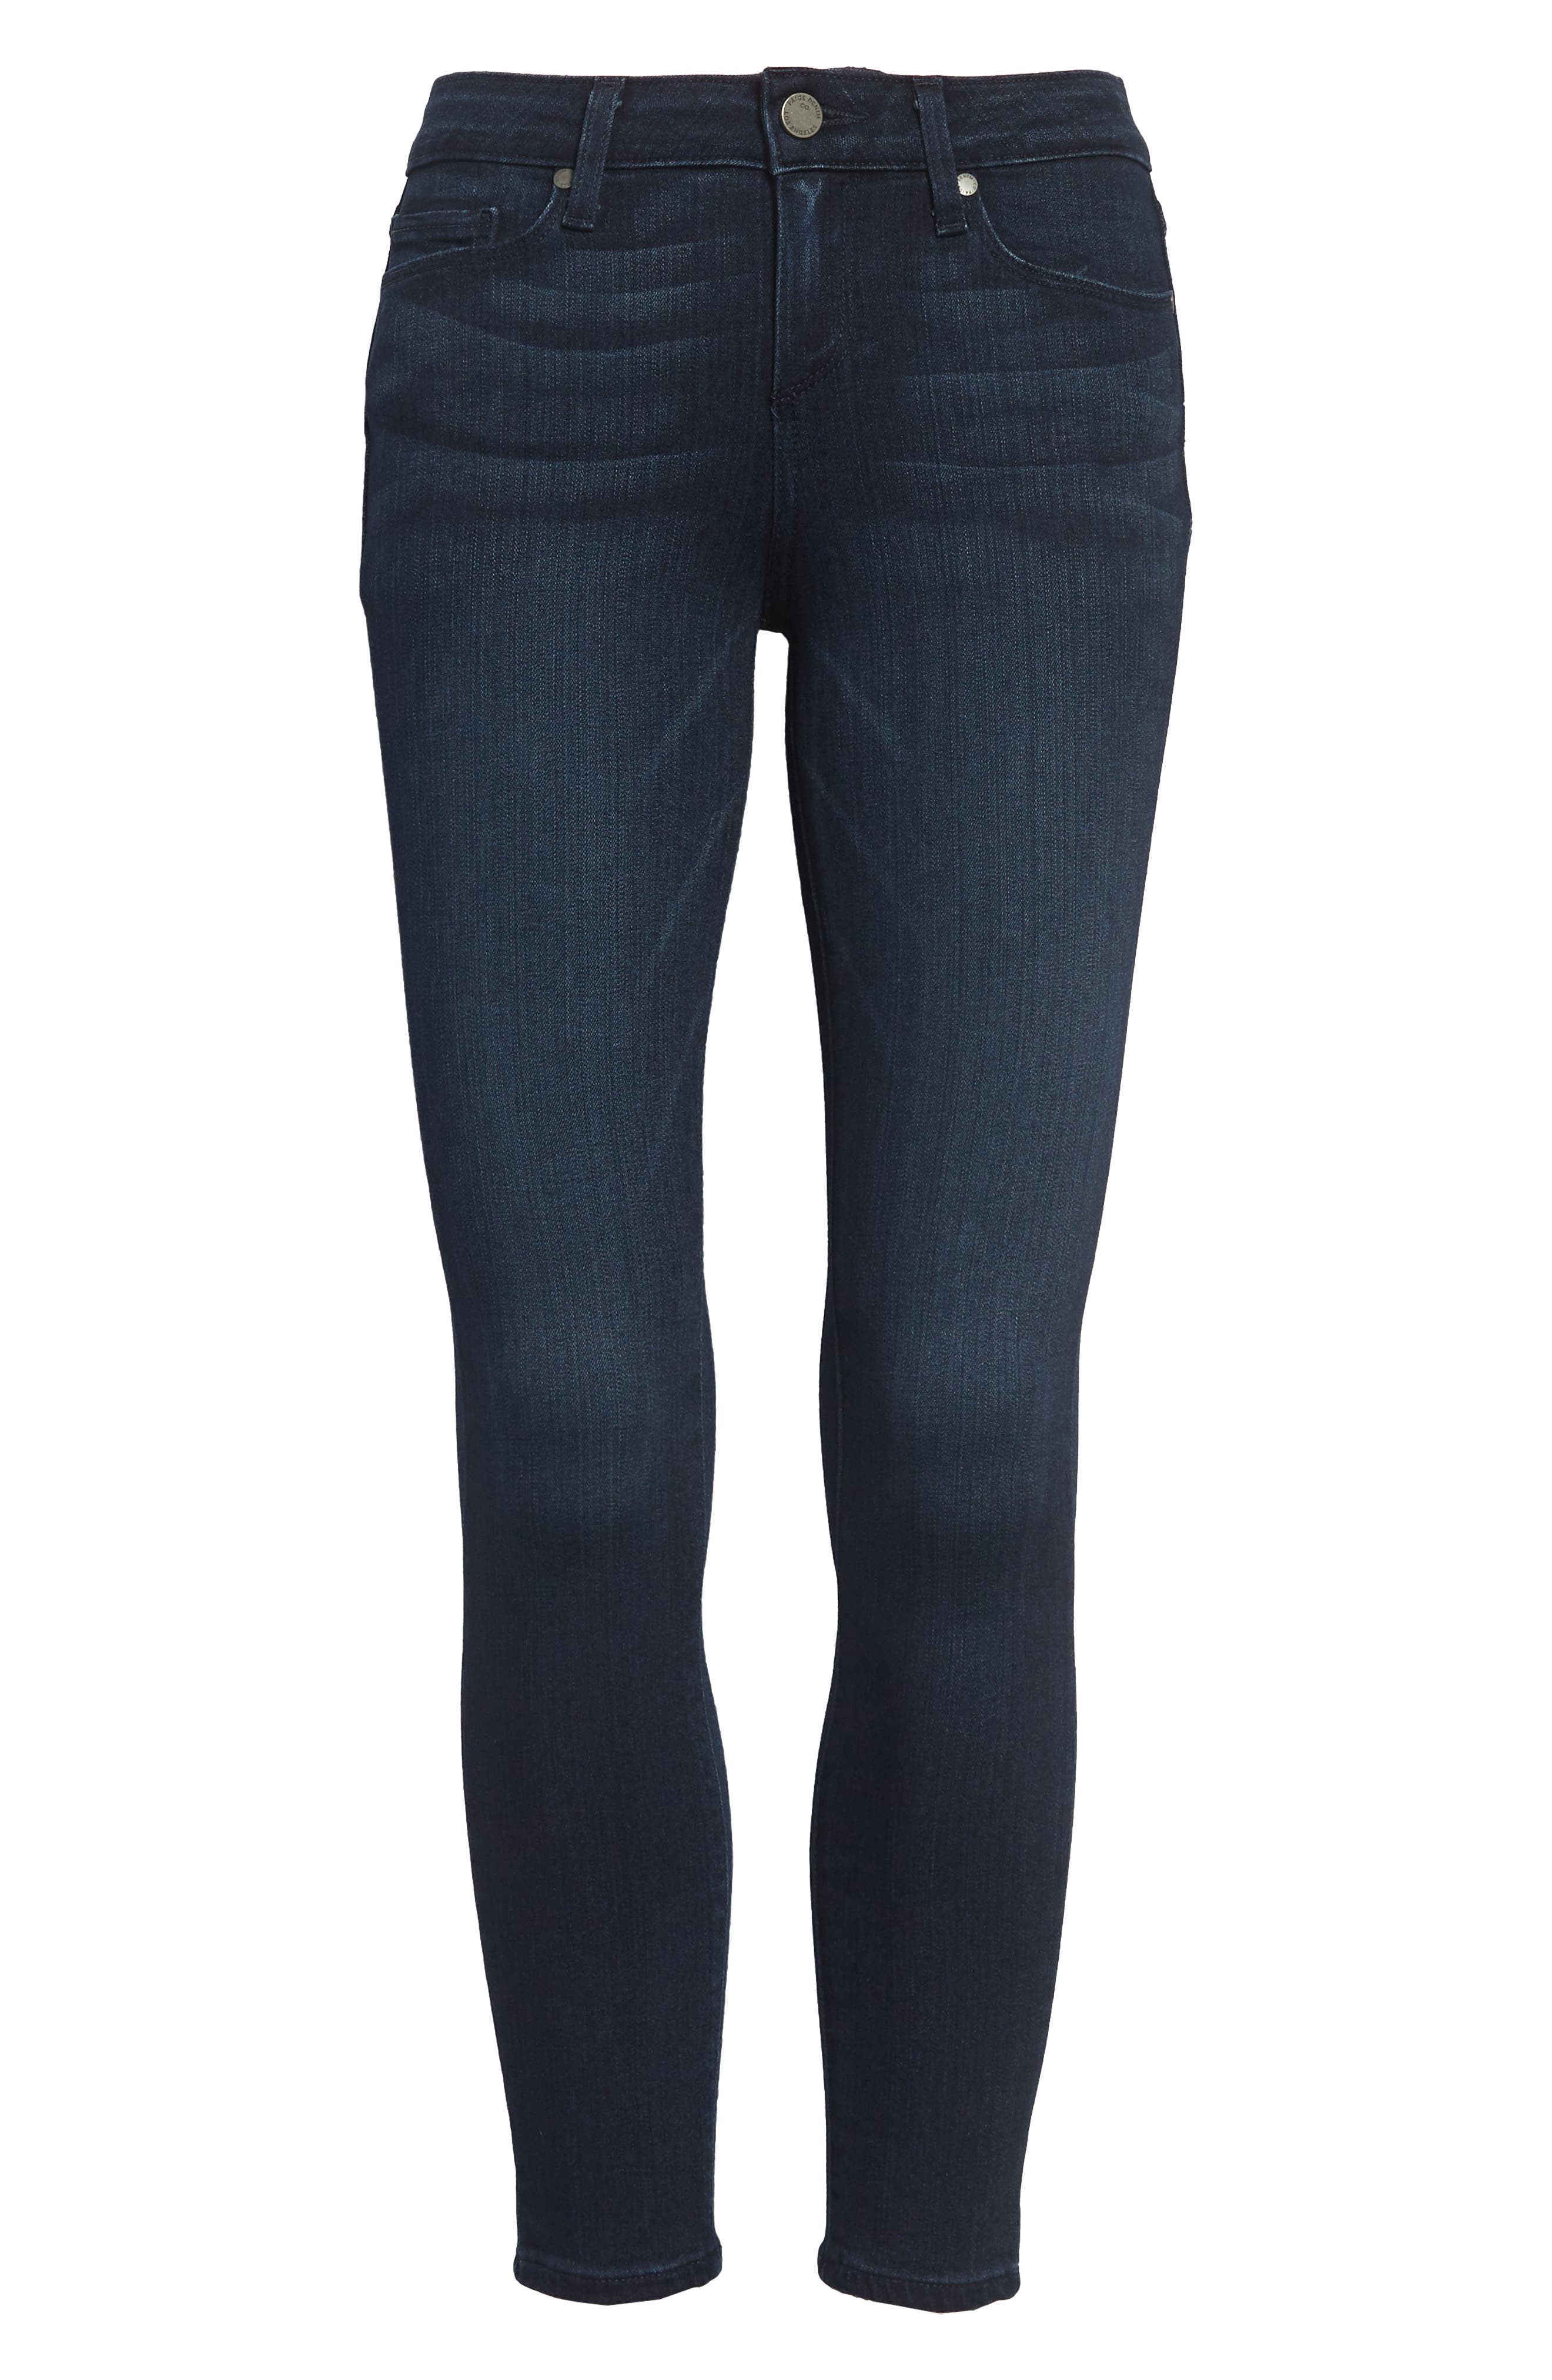 7 for all mankind mens jeans